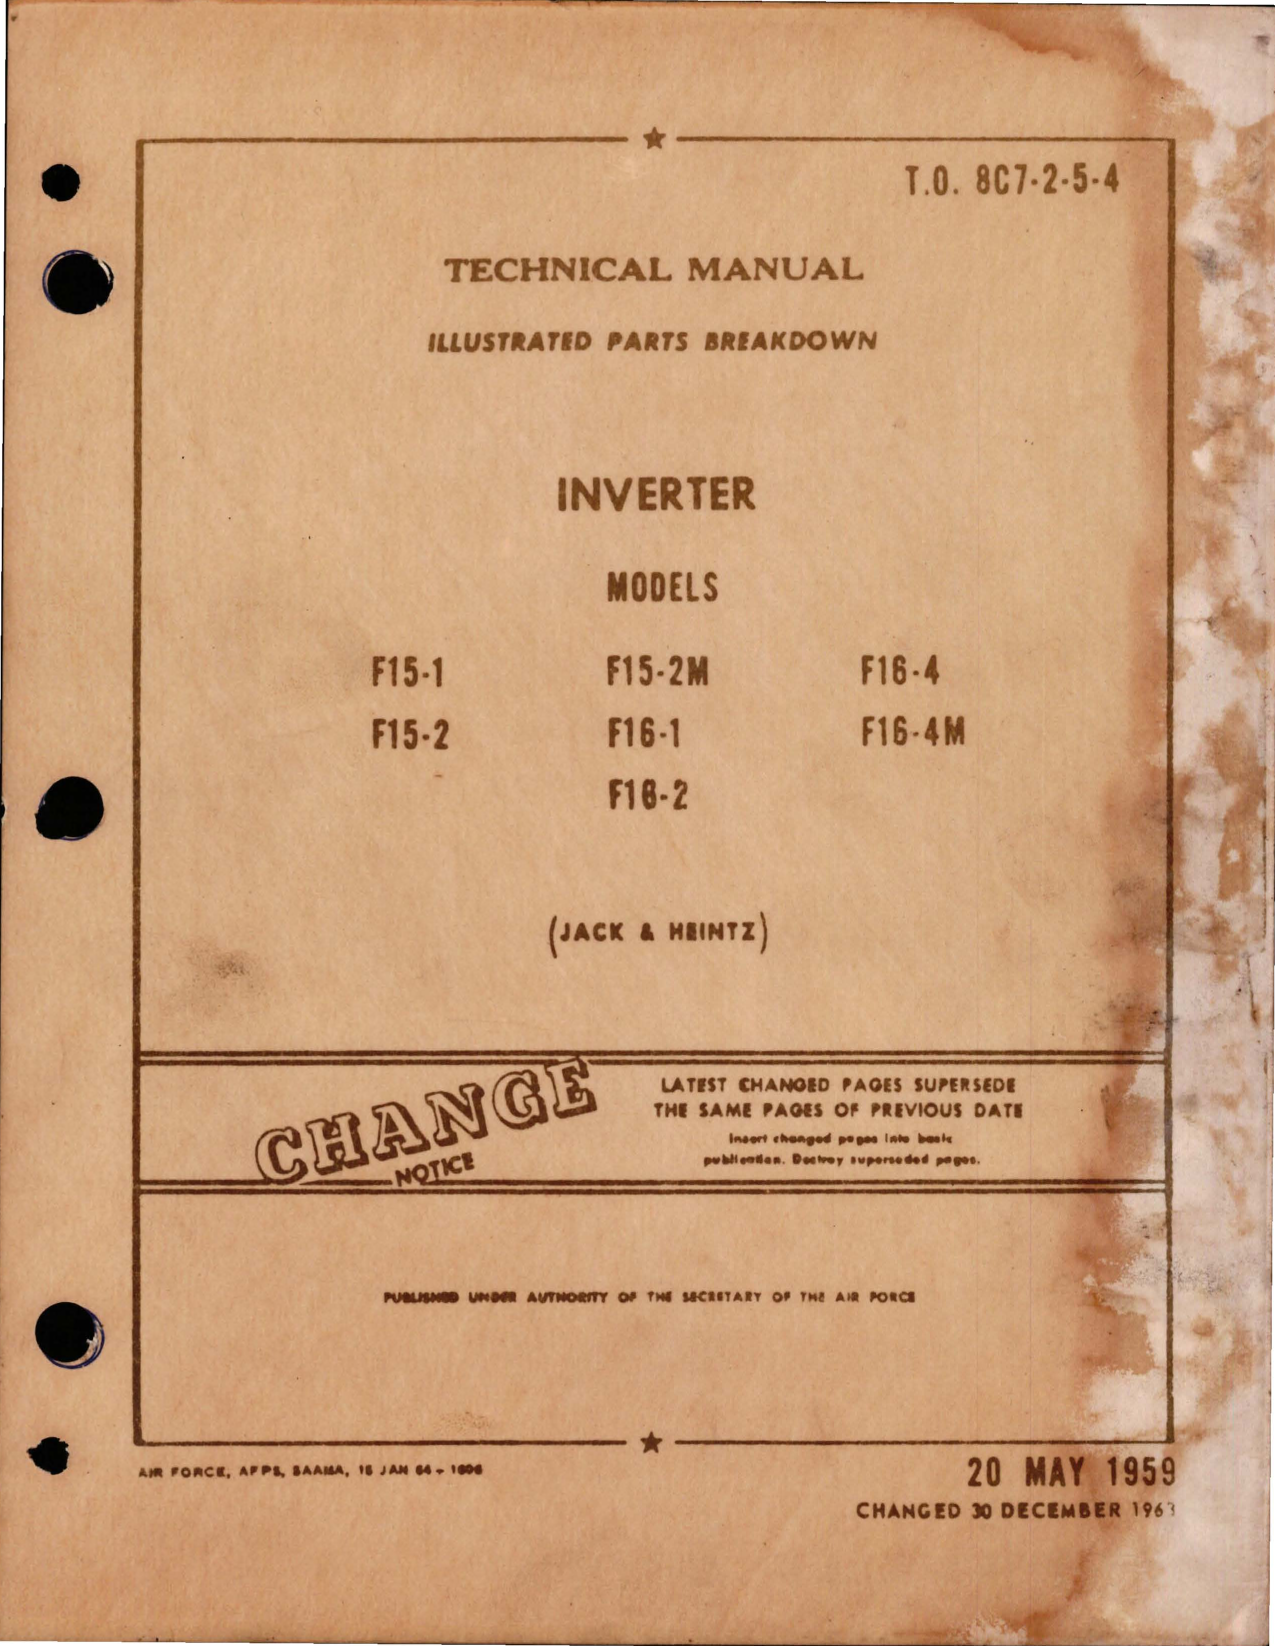 Sample page 1 from AirCorps Library document: Illustrated Parts Breakdown for Inverter - Models F15-1, F15-2, F15-2M, F16-1, F16-2, F16-4, and F16-4M